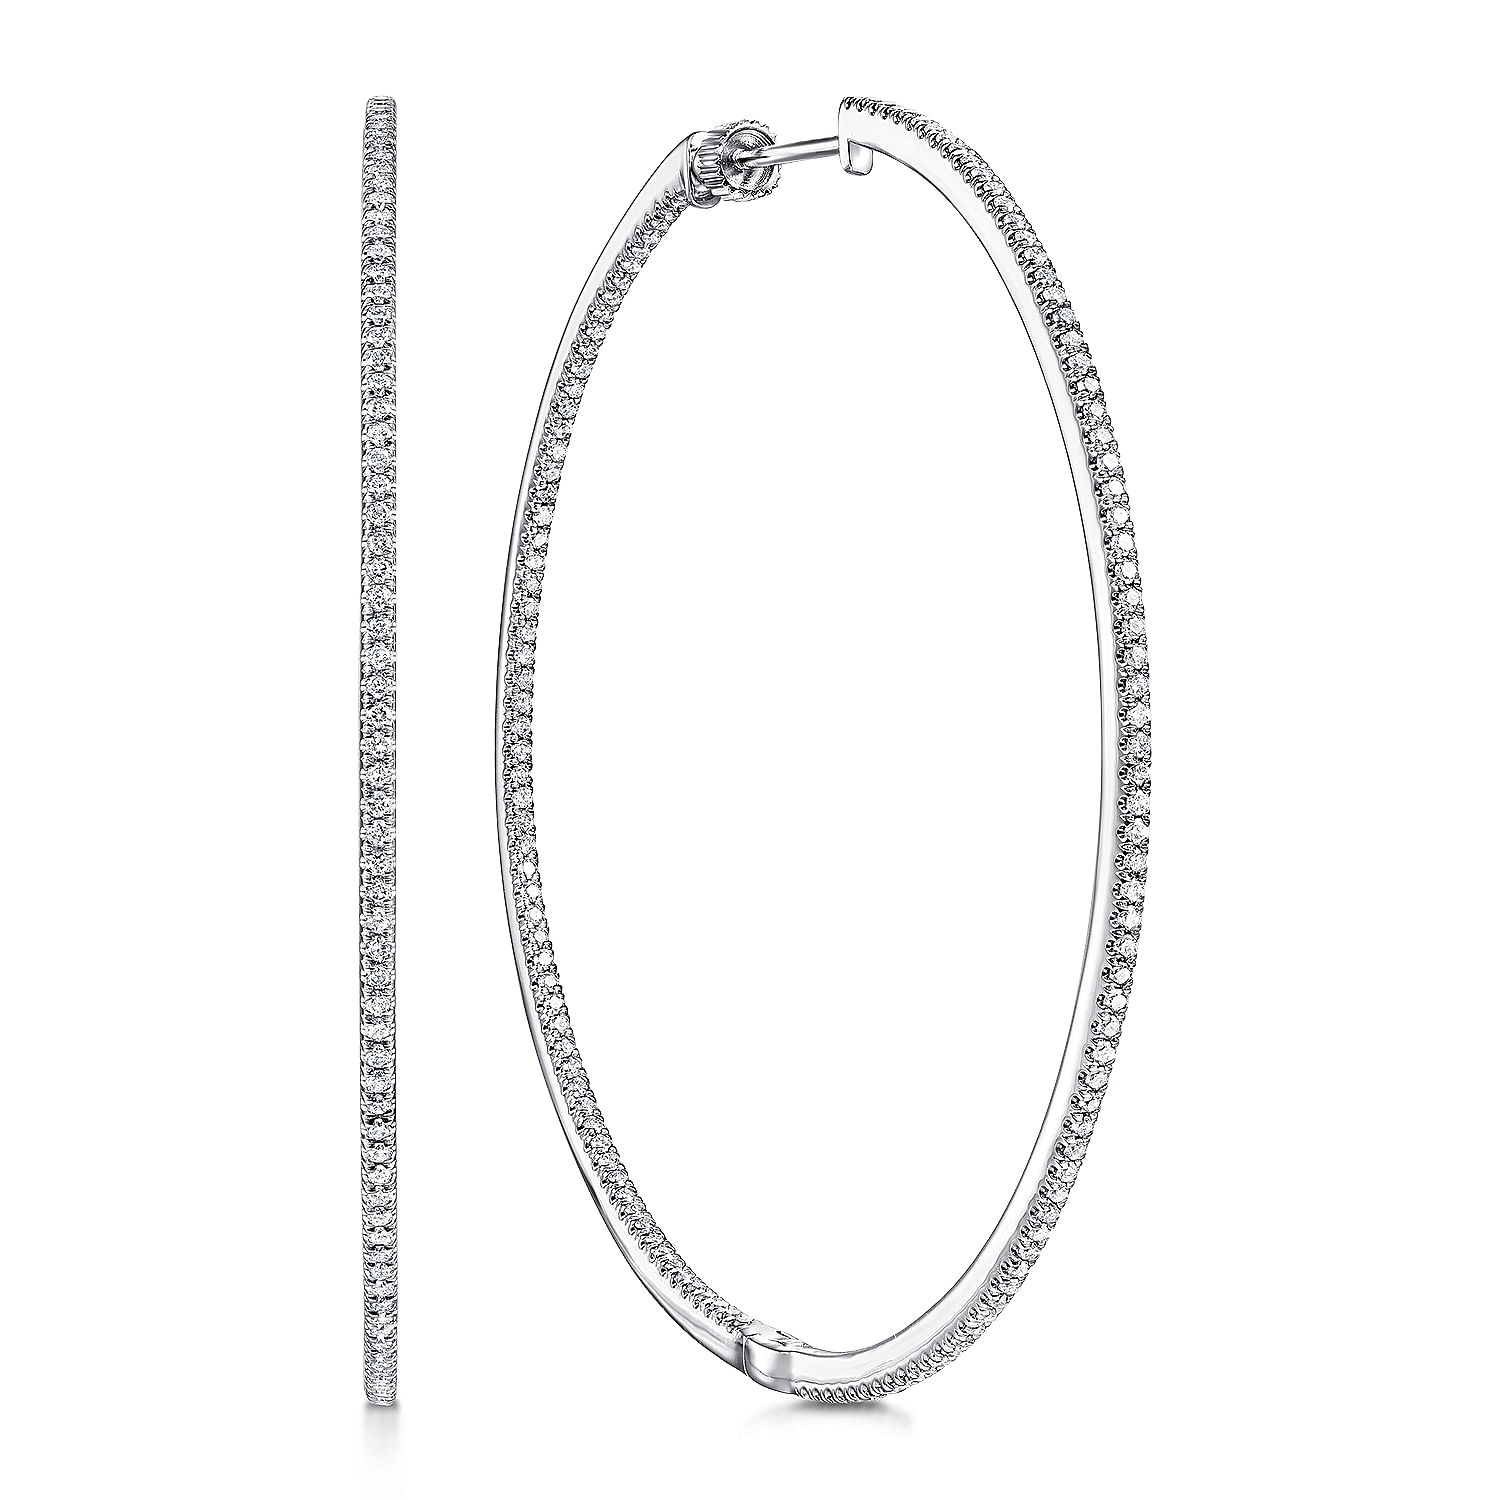 14K White Gold French Pavé 60mm Round Inside Out Diamond Hoop Earrings